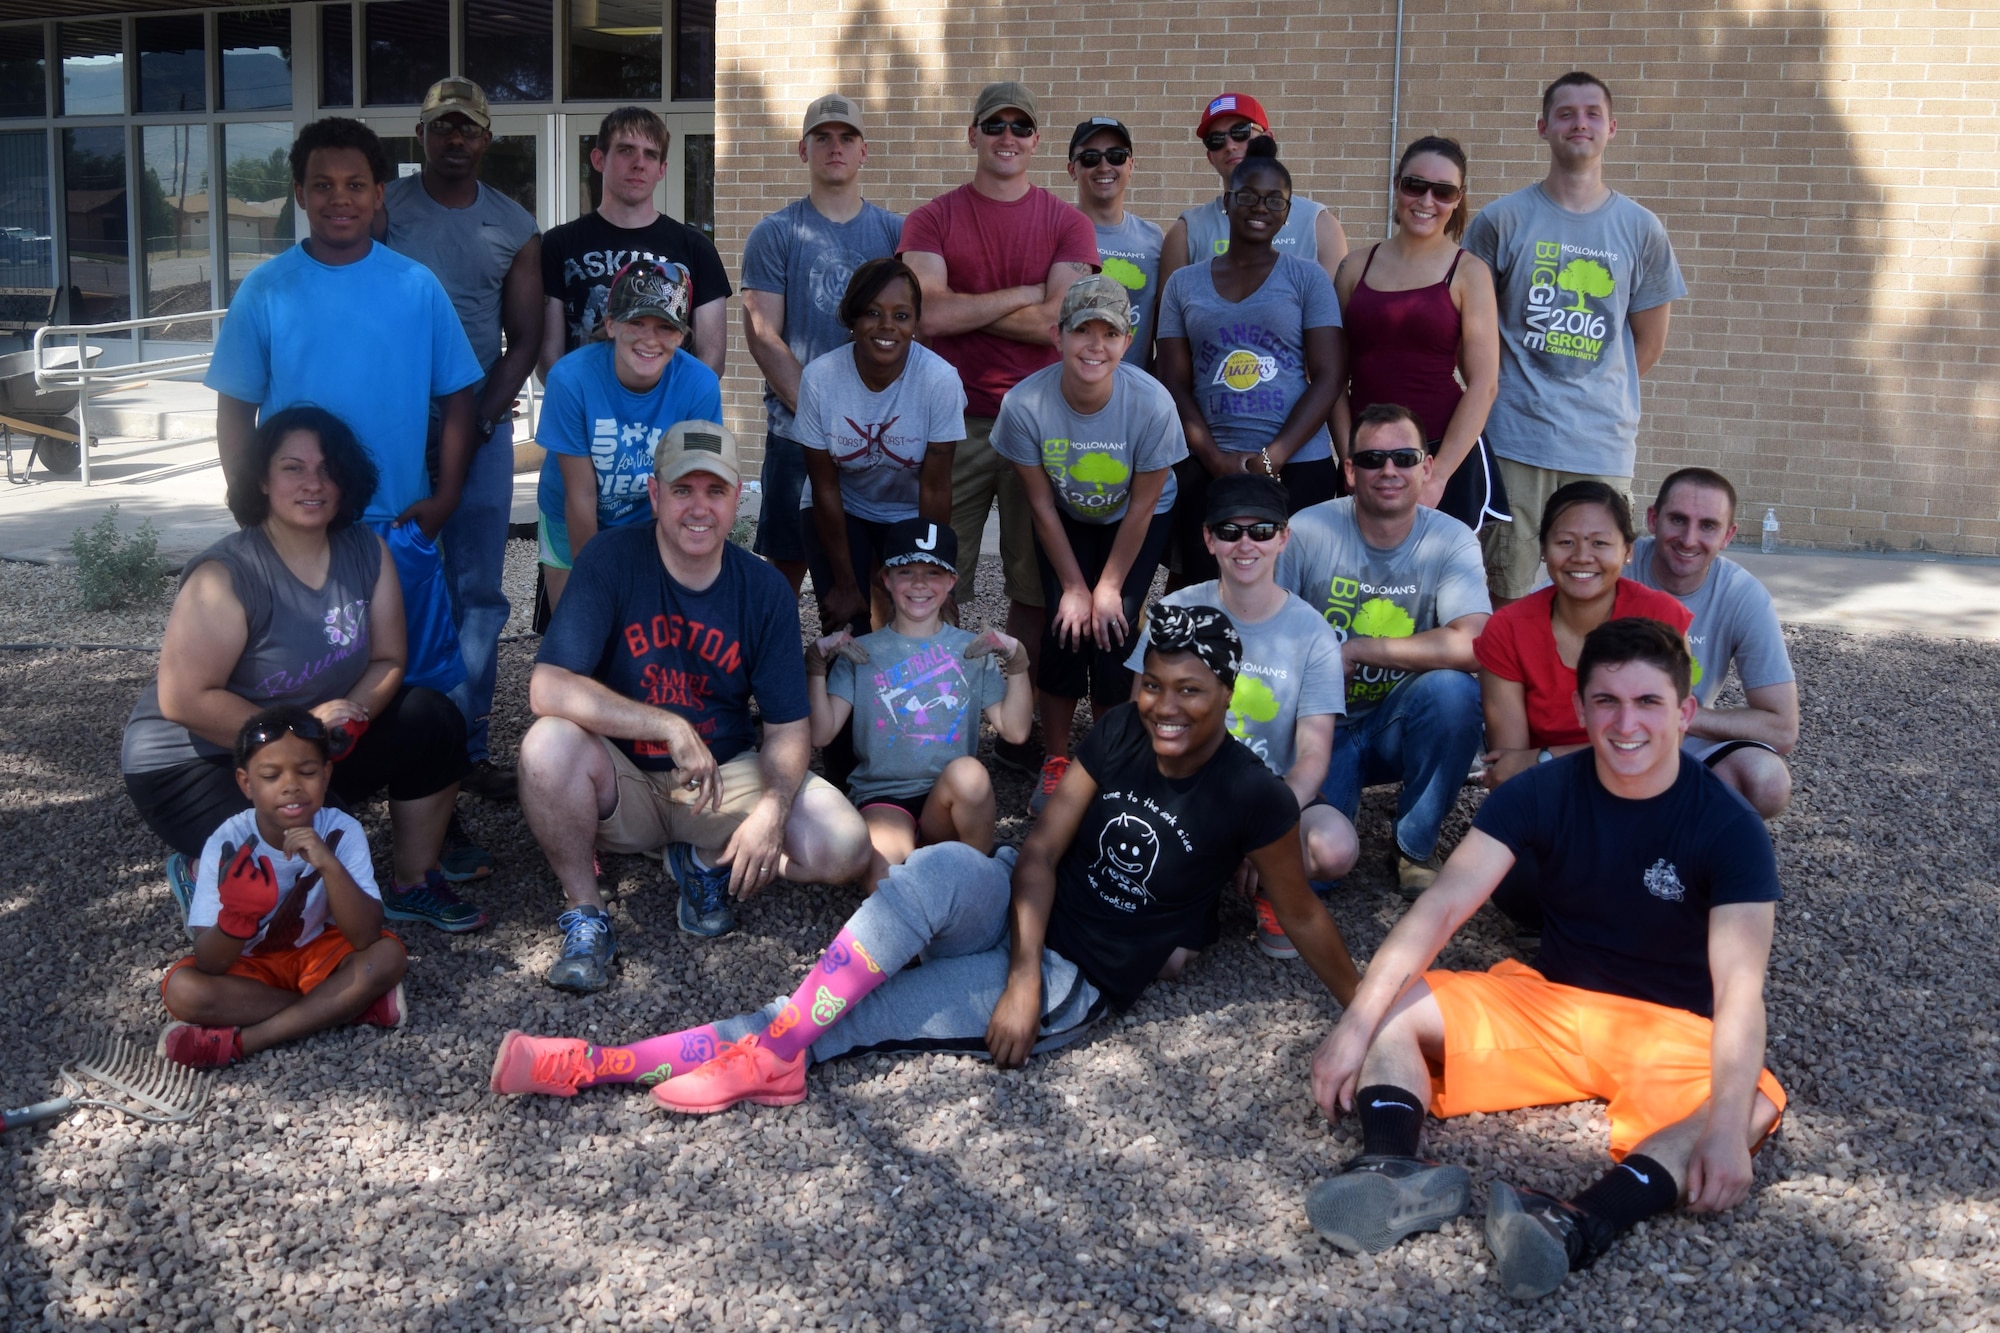 Volunteers from the Holloman community pose for a group photo at Sierra Elementary School in Alamogordo, N.M., on July 30, 2016. Members of the base volunteered over the course of several weeks to survey the location and provide landscaping services. (U.S. Air Force photo by Staff Sgt. Eboni Prince)